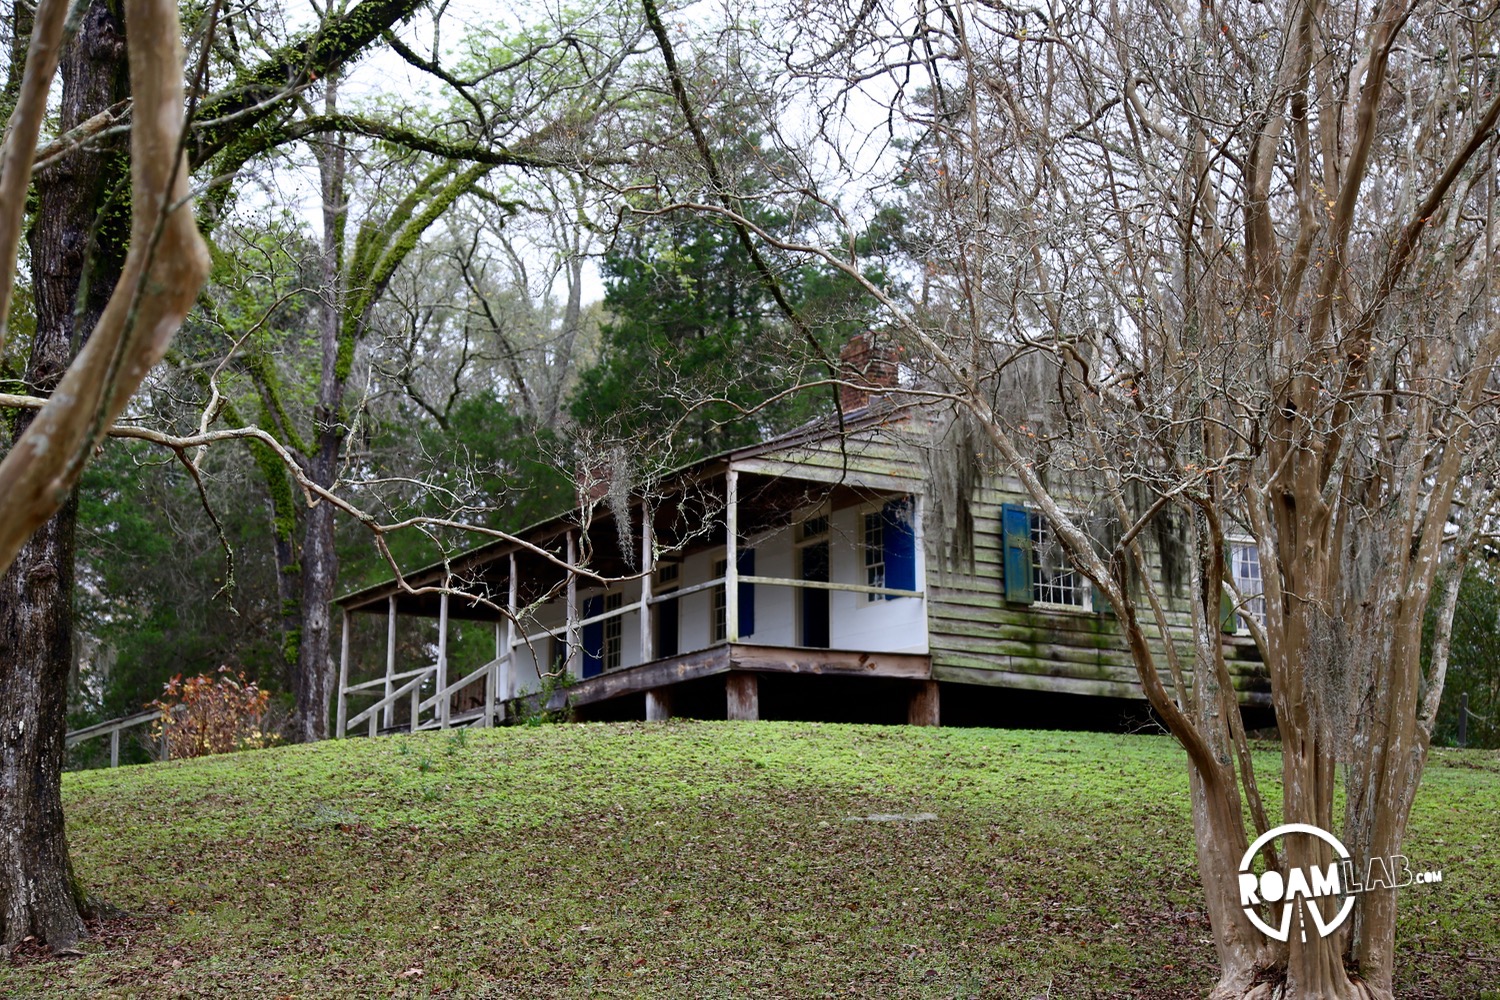 Mount Locust Inn is one of the few remaining stands along the Natchez Trace.